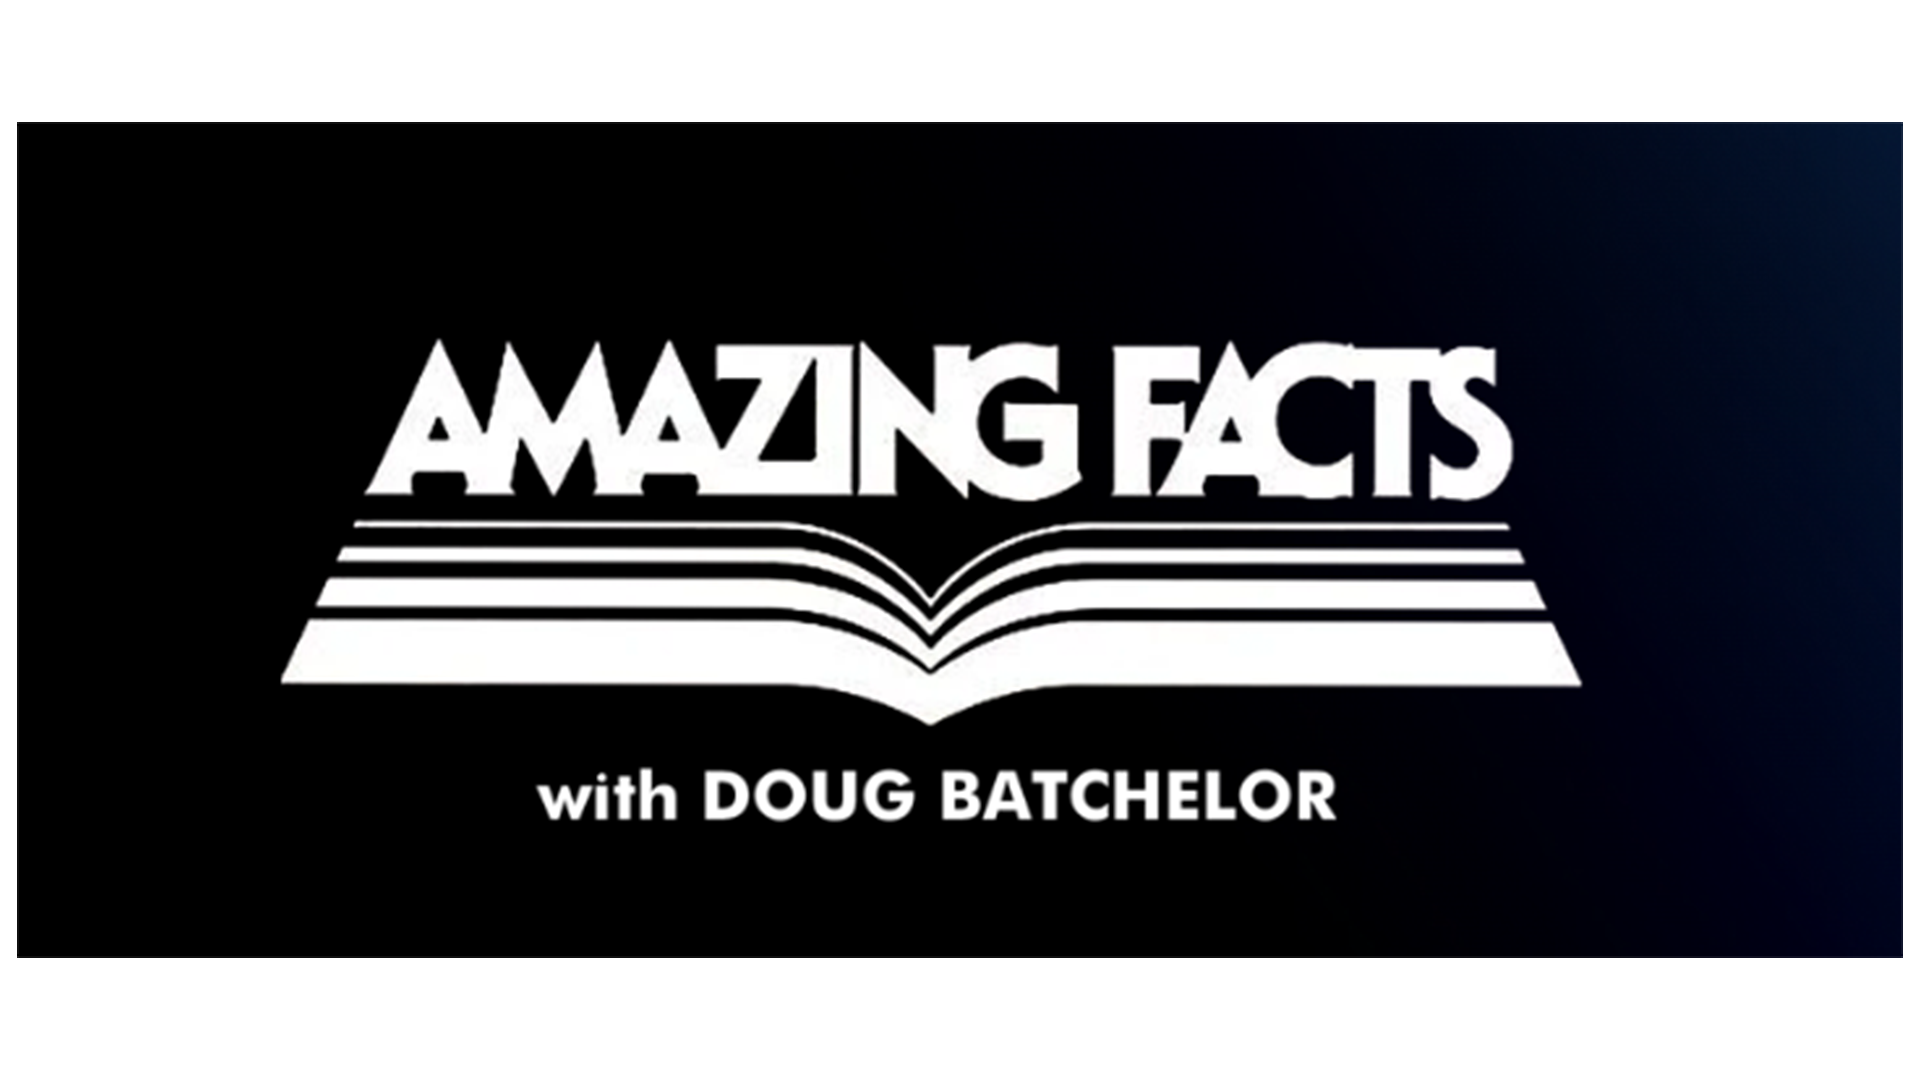 Amazing Facts began in 1965 with a brilliant radio idea to attract listeners from all walks of life. Joe Crews, the ministry's first speaker, opened each radio broadcast with an amazing fact and then followed with a related biblical message that everyone could understand. At the end of each program, he offered a free Bible lesson to encourage listeners to study God's Word for themselves.  In 1994, Doug Batchelor, an energetic soul-winning evangelist and author, took the reins of the ministry. Pastor Doug is